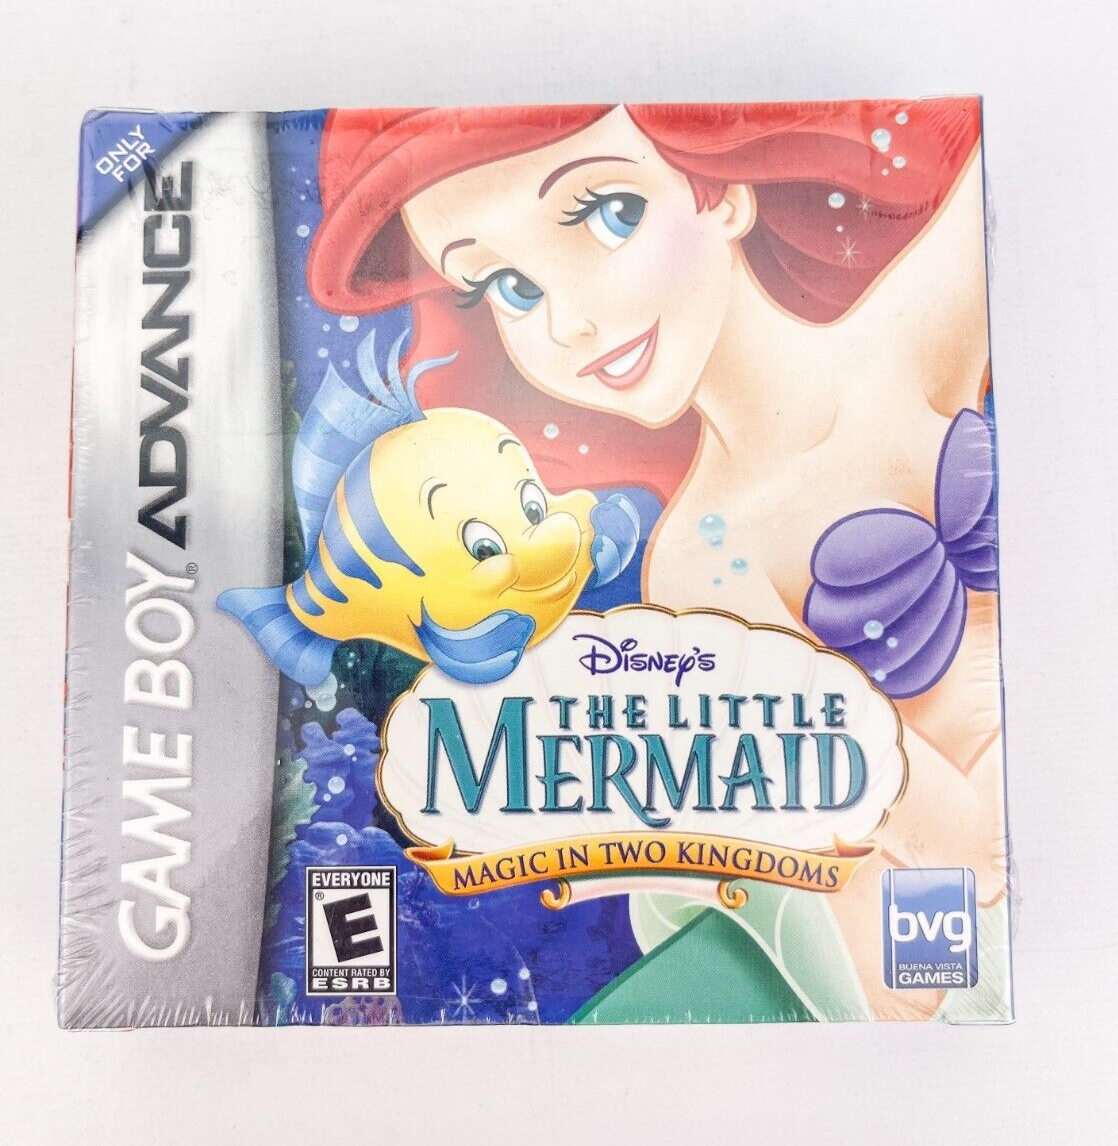 Primary image for Disneys The Little Mermaid Magic in Two Kingdoms Game Boy Advance GBA Game